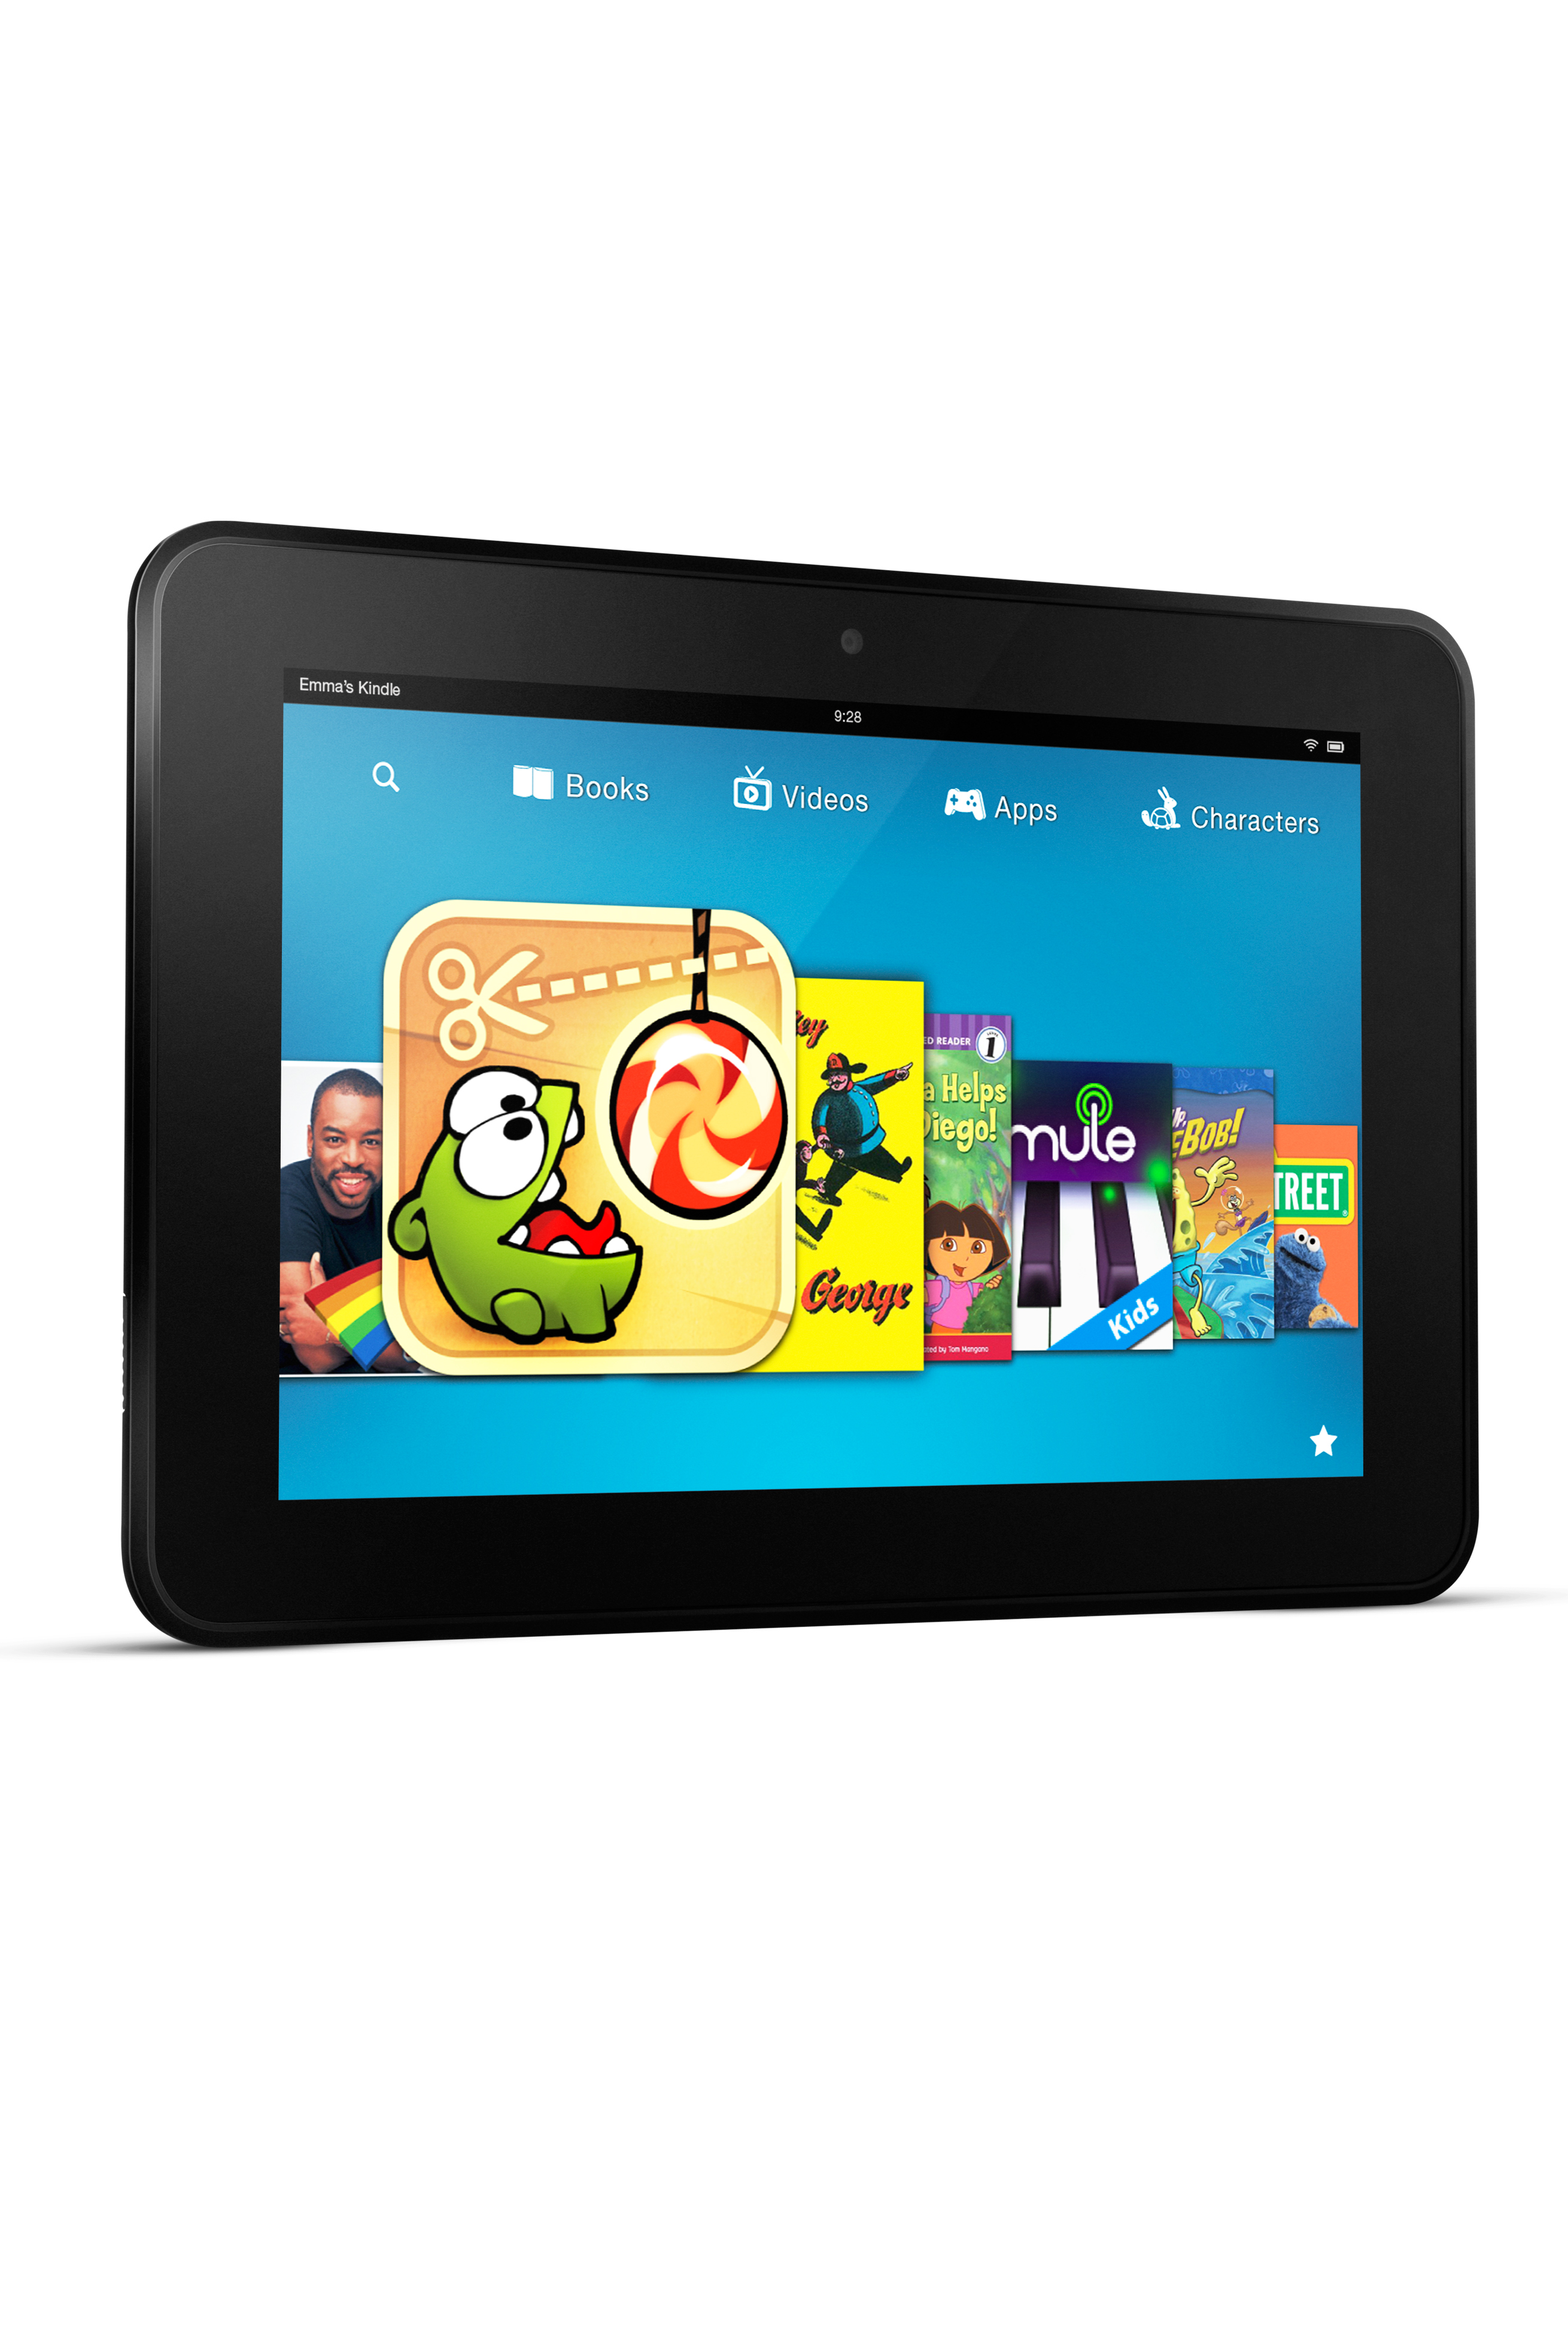 How To Put Wallpaper On The Kindle Fire HD